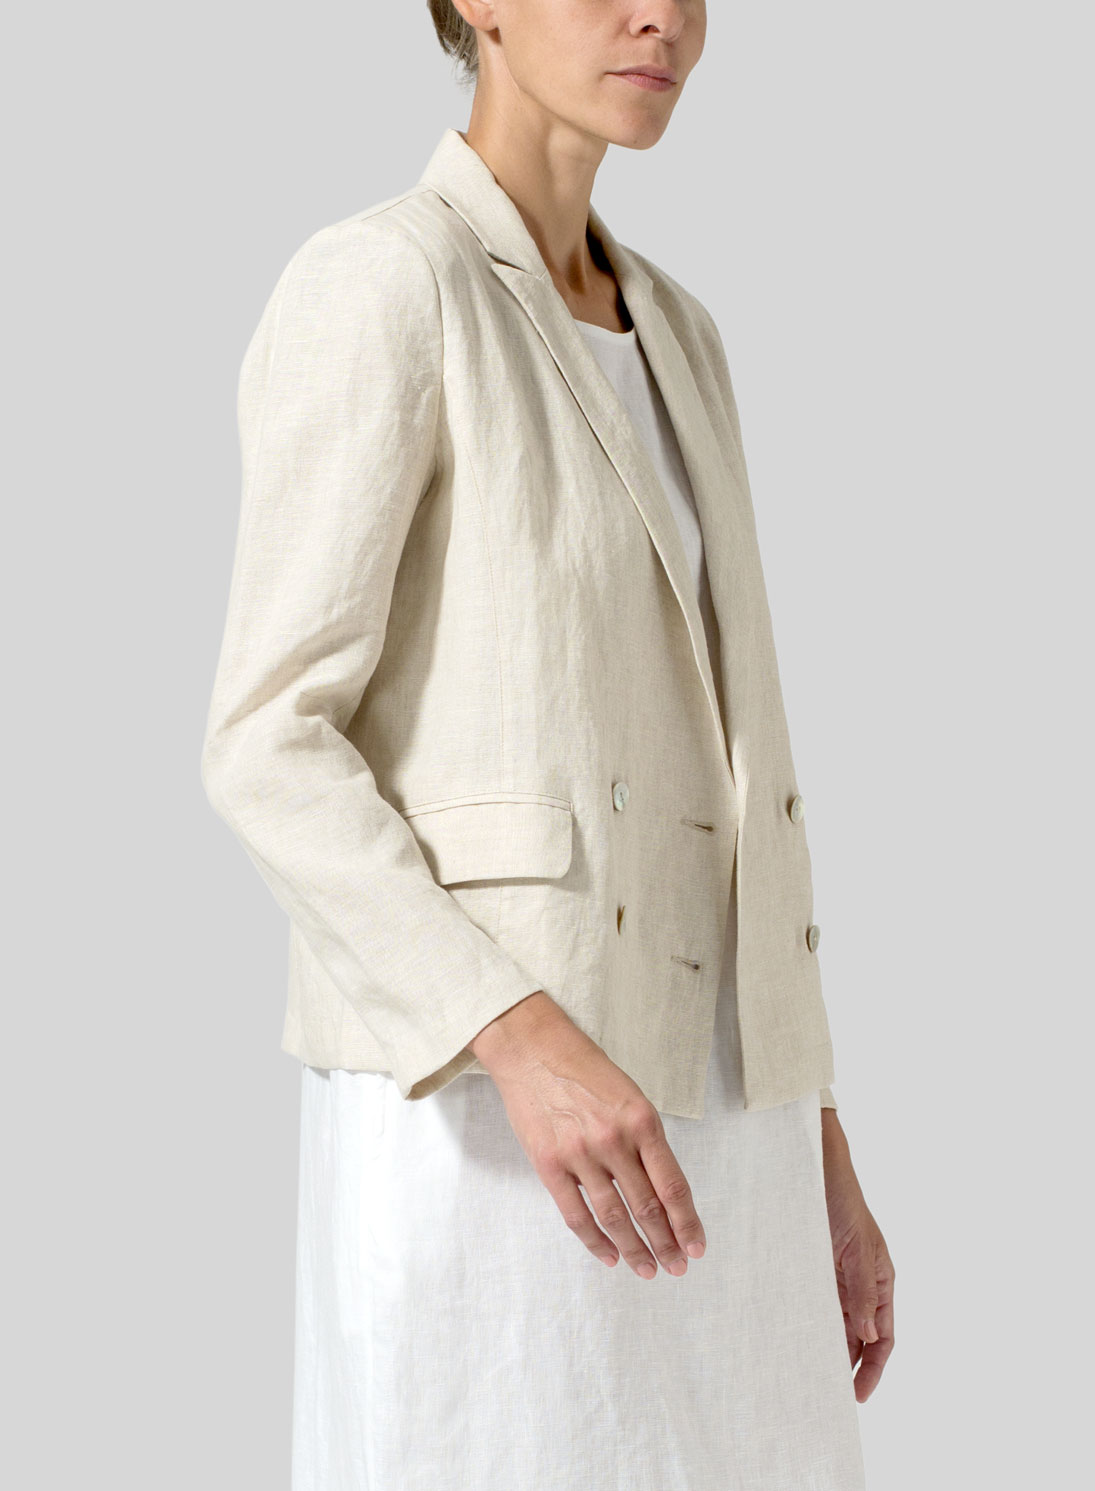 Uptown Aesthetic Beige Linen Belted Double-Breasted Blazer